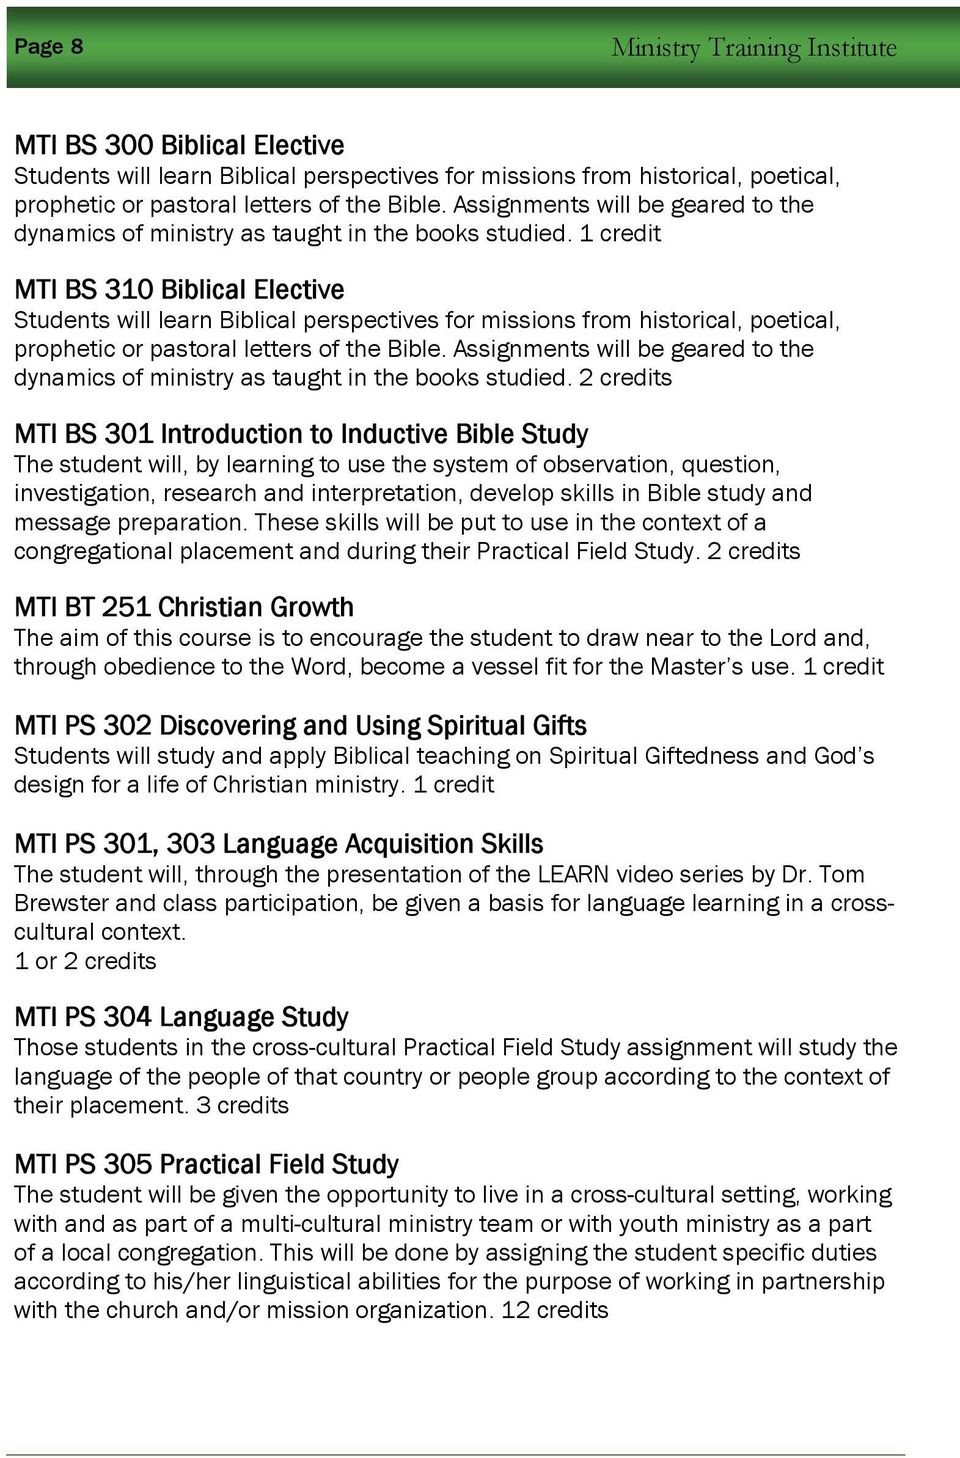 1 credit MTI BS 310 Biblical Elective Students will learn Biblical perspectives for missions from historical, poetical, prophetic or pastoral letters of the Bible.